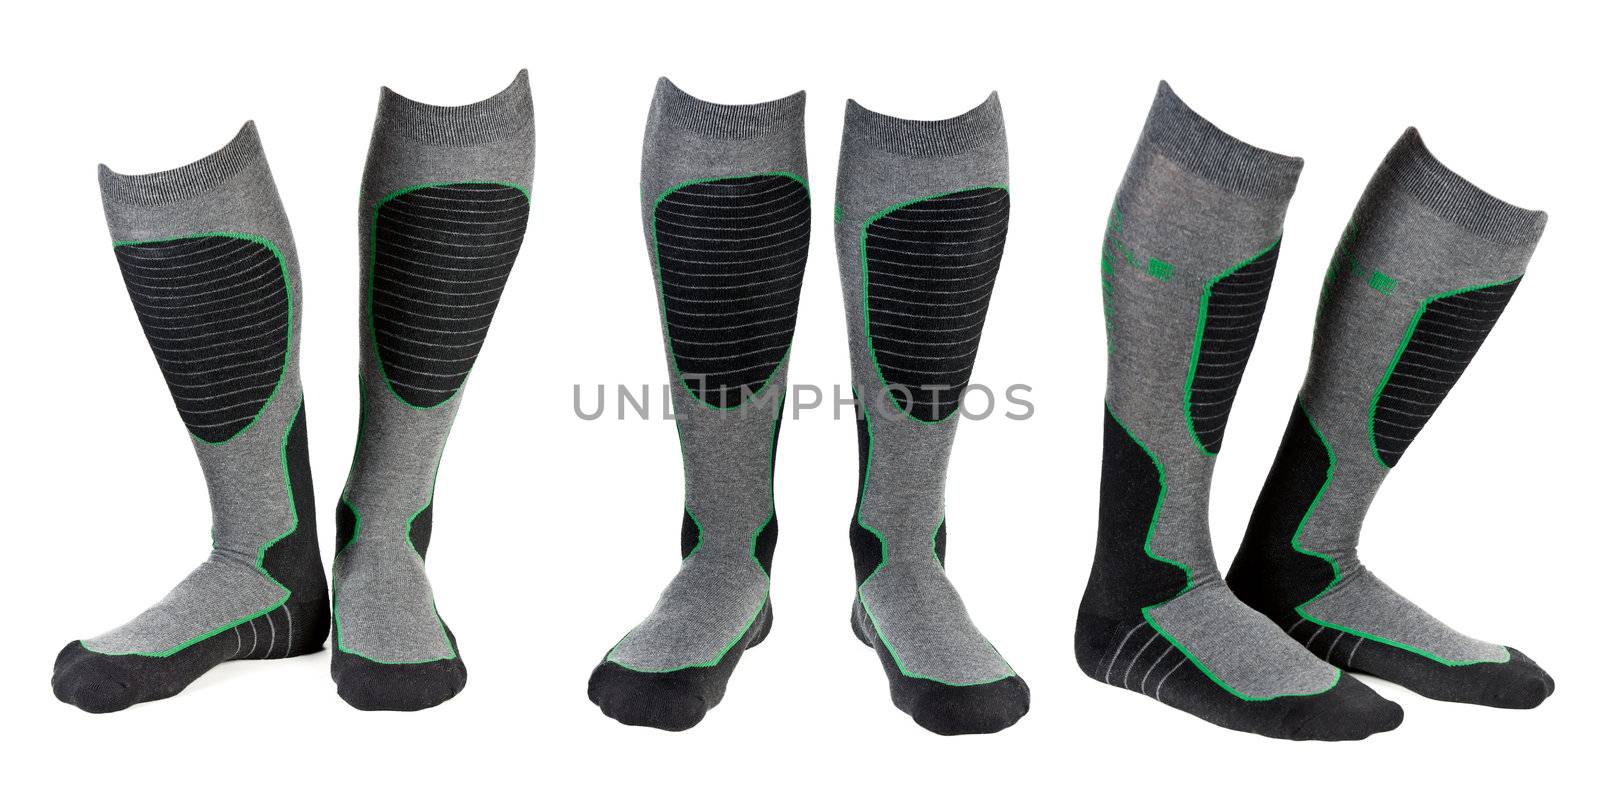 A collage of three pairs of gray ski socks. The image is composed of several images.